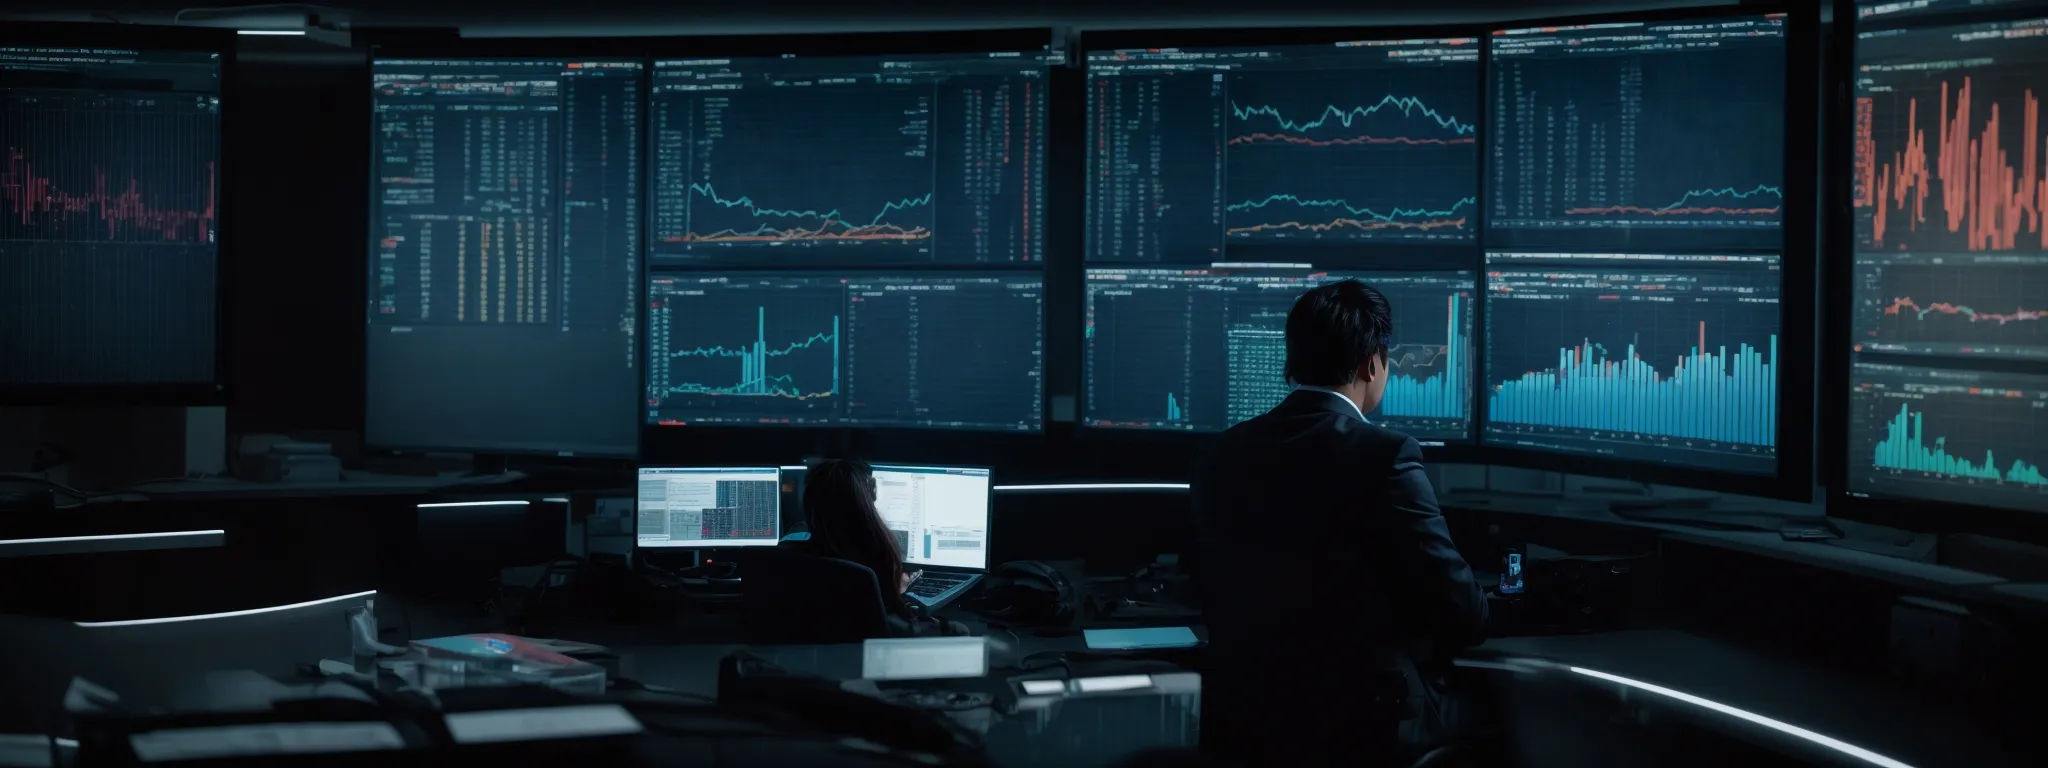 a focused individual gazes at a vibrant computer screen surrounded by graphs and data analytics software.